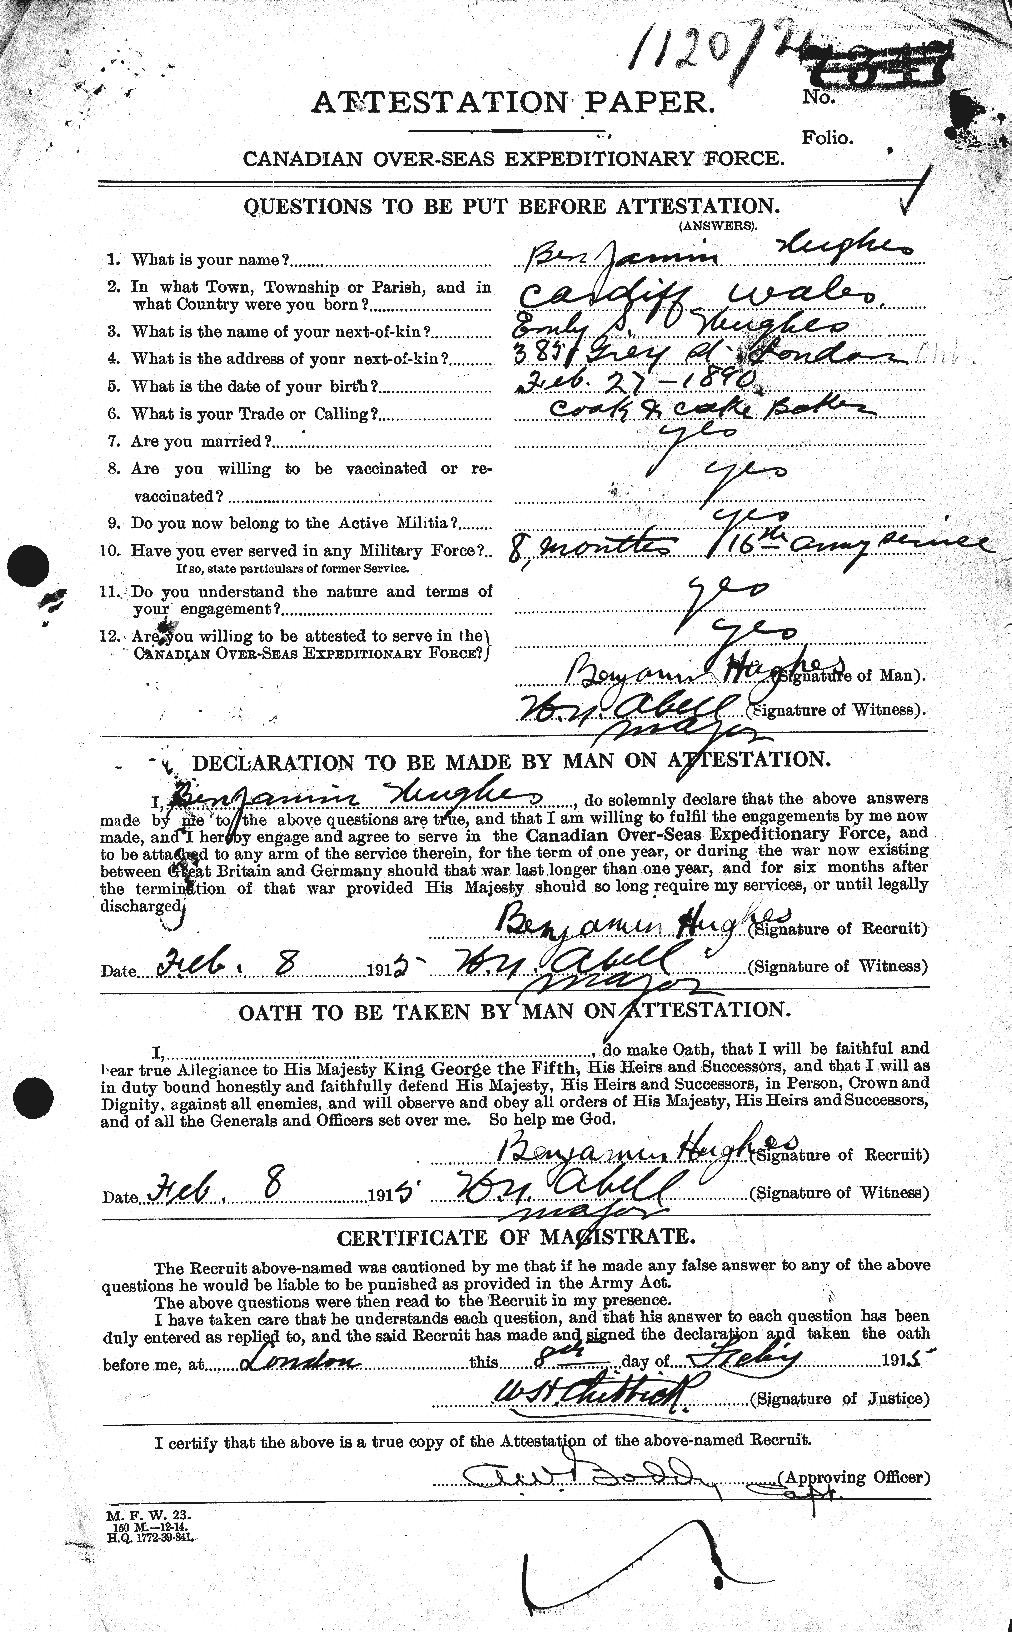 Personnel Records of the First World War - CEF 402575a